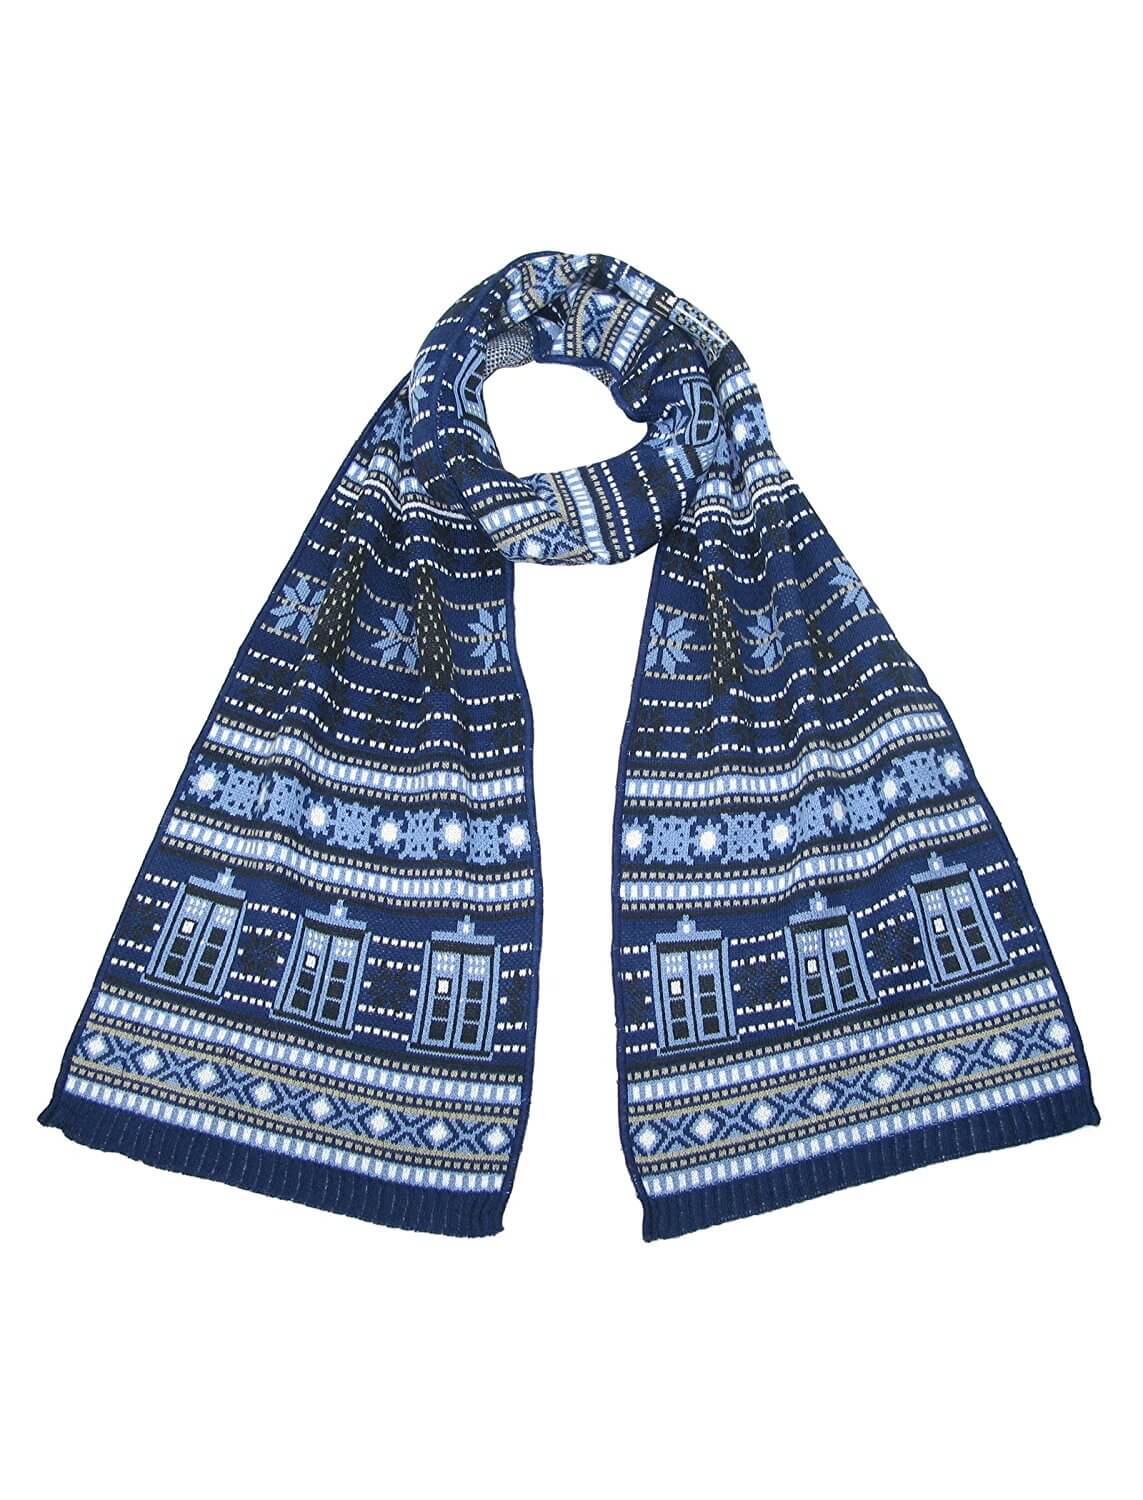 Official Doctor Who Knitted Scarf by LOVARZI